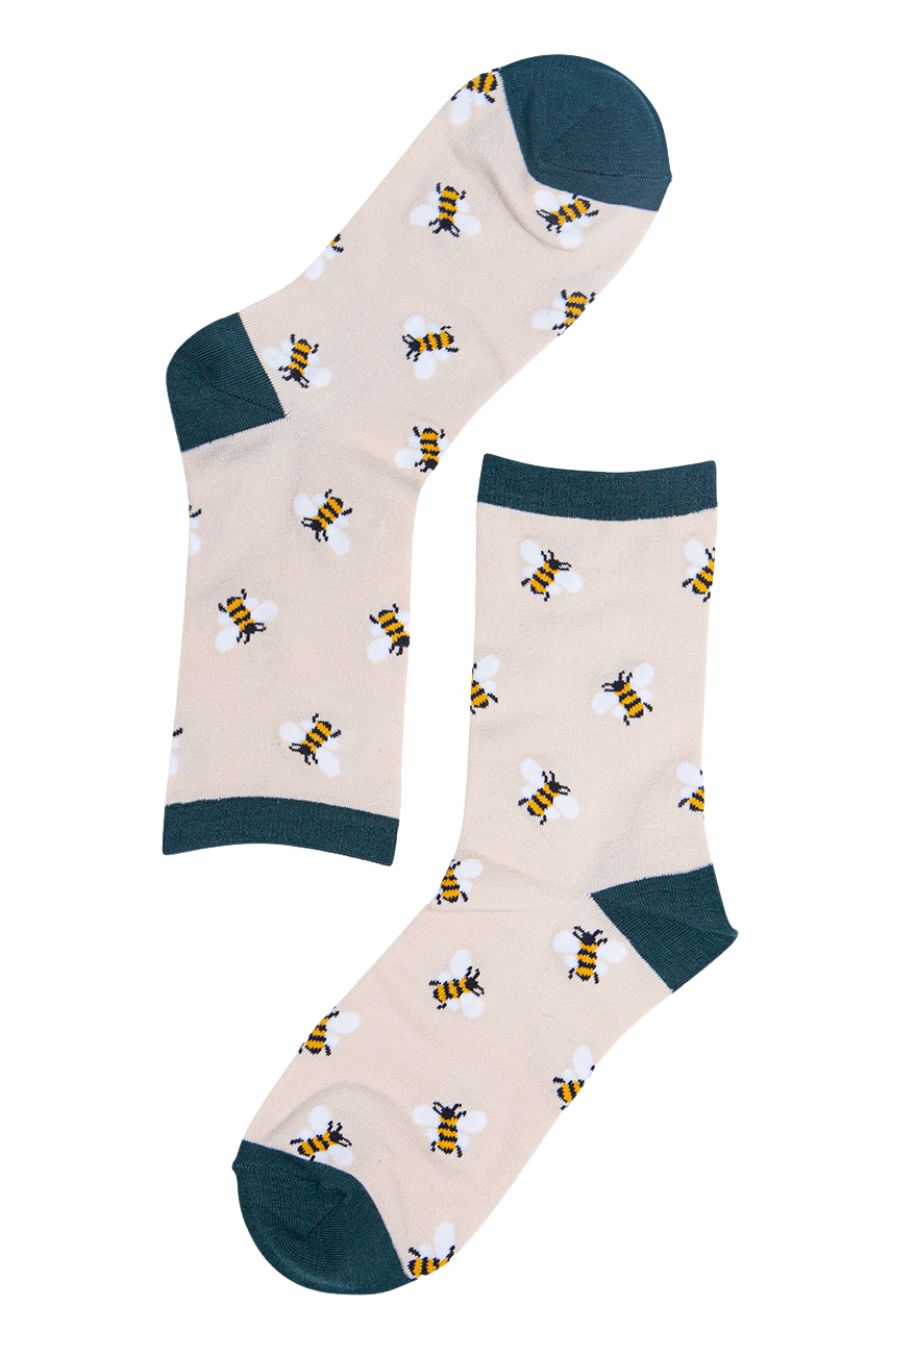 cream, green bamboo socks with bumblebees on them